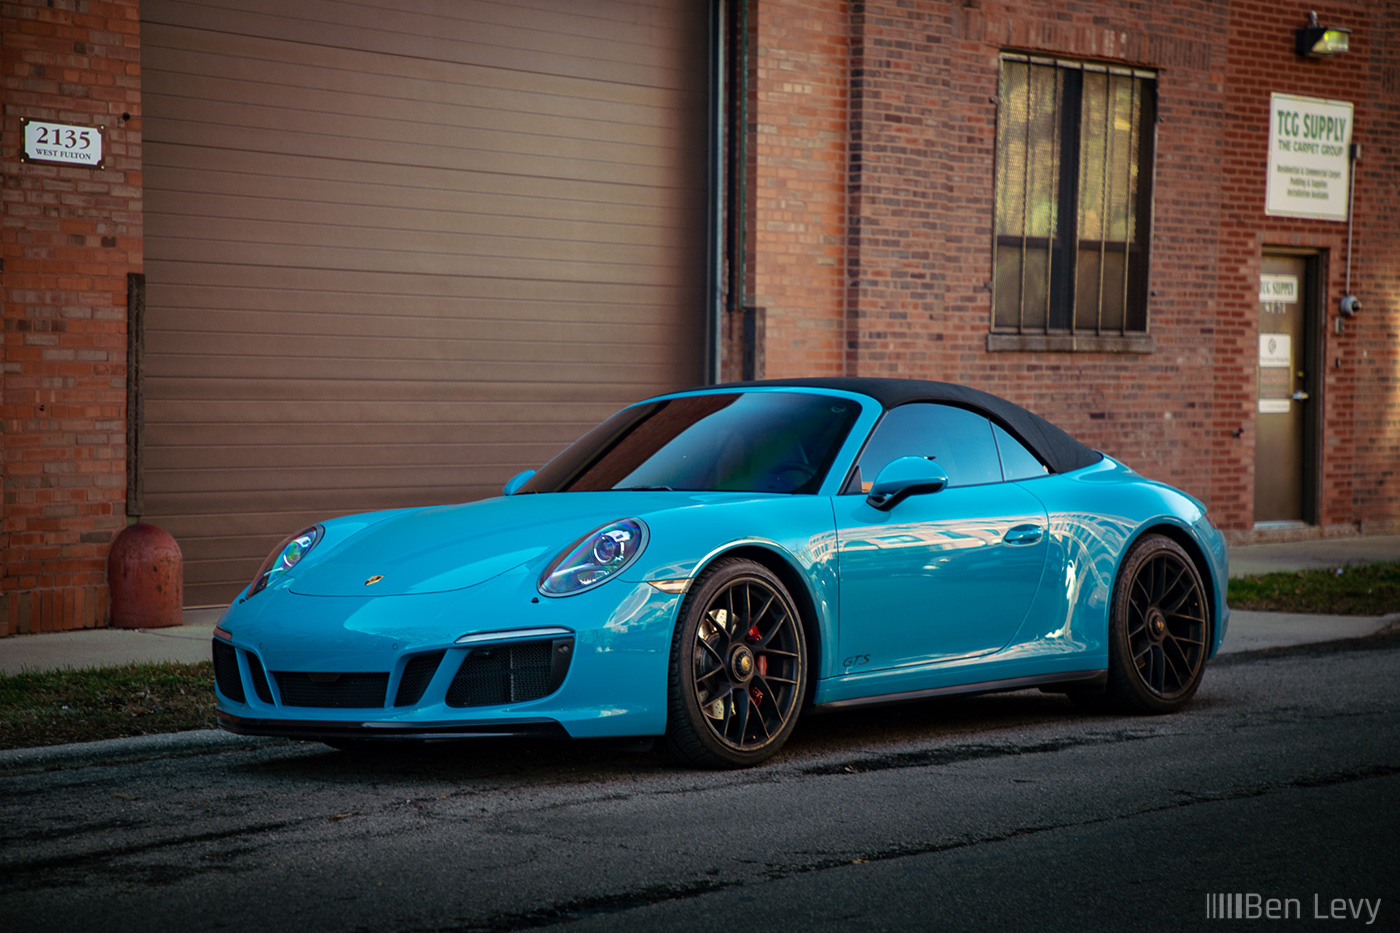 Blue 911 Carrera GTS Cabriolet in Chicago